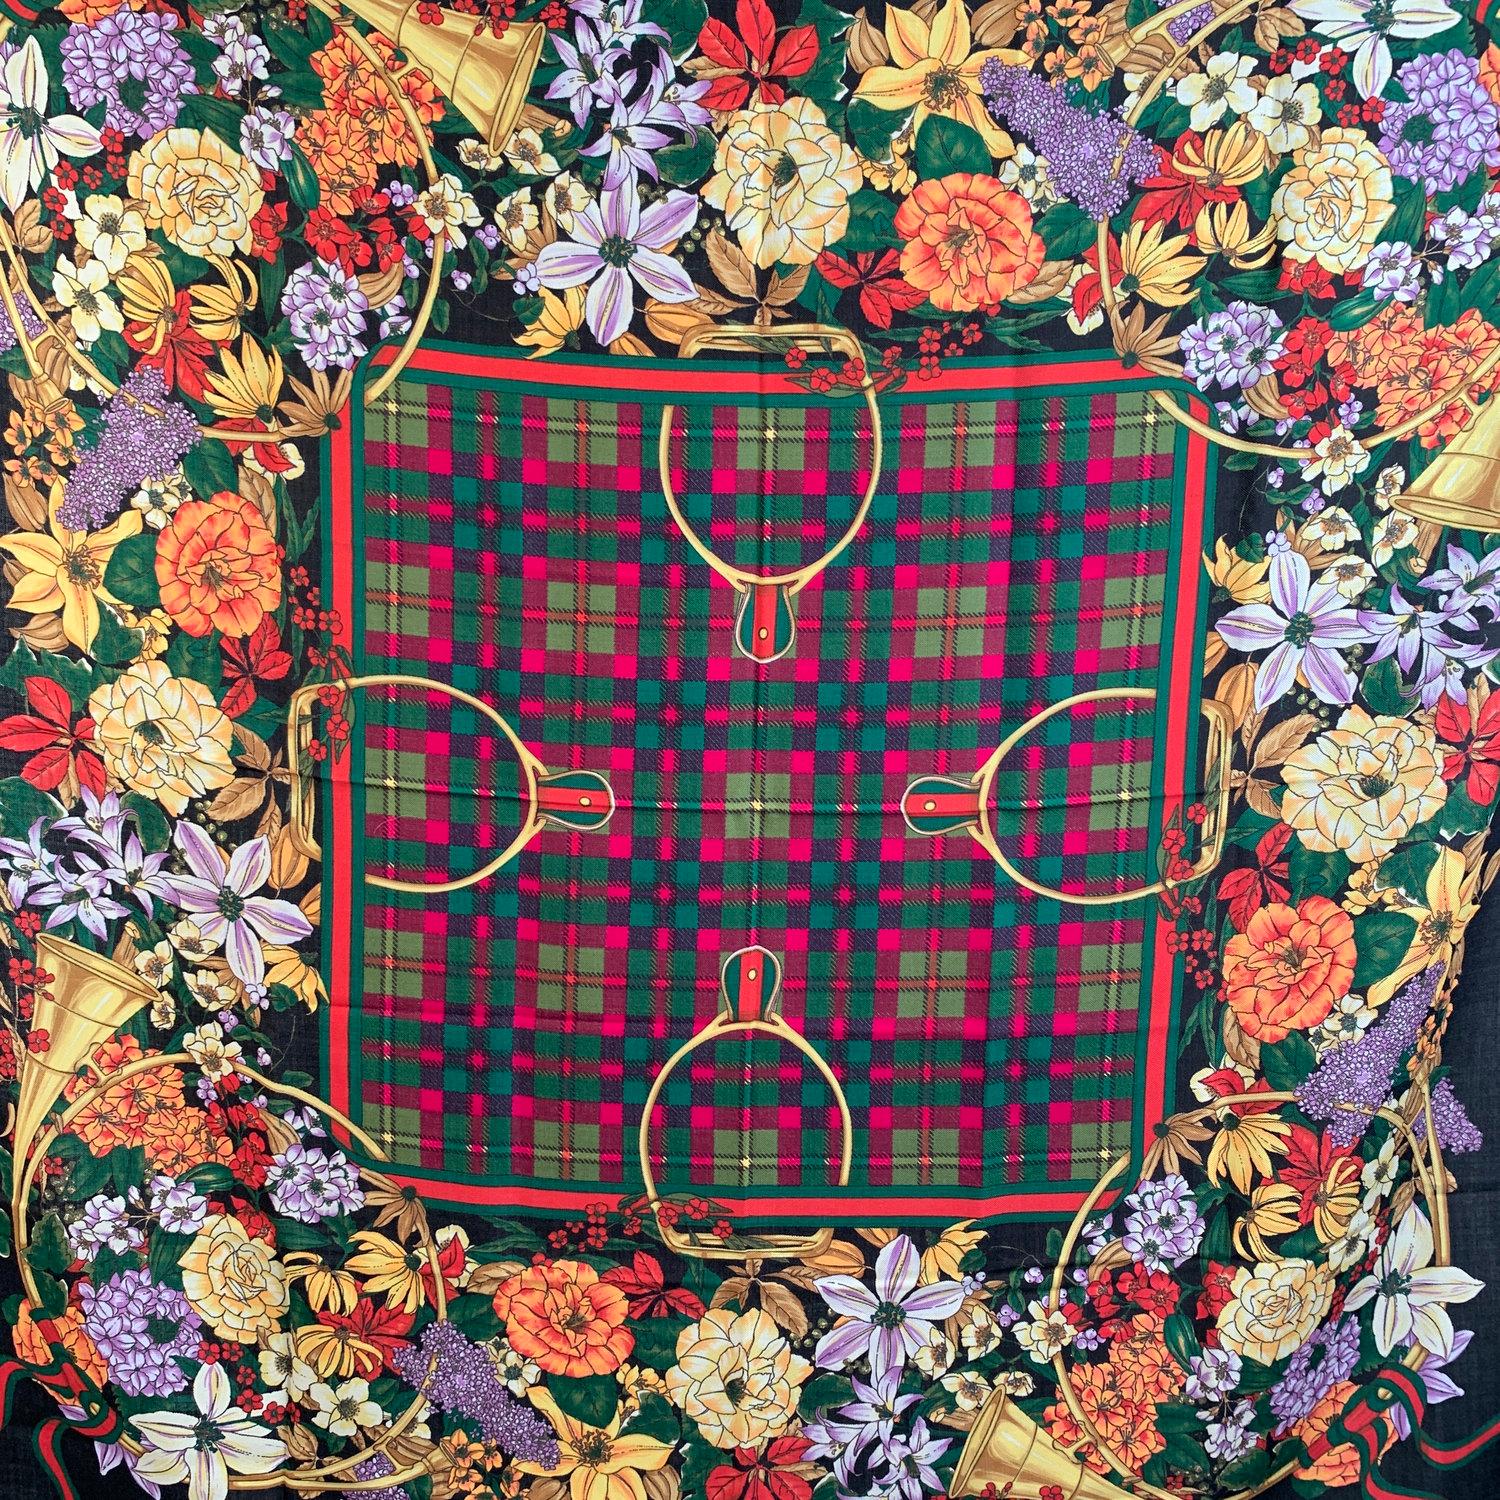 Beautiful Gucci vintage maxi shawl from the 1980s. Composition: 70% wool, 30% Silk. Black border. Composition tag is still attached. Floral design, with web ribbons. Measurements: 50 x 50 inches - 138 x 168 cm



Details

MATERIAL: Wool

COLOR: